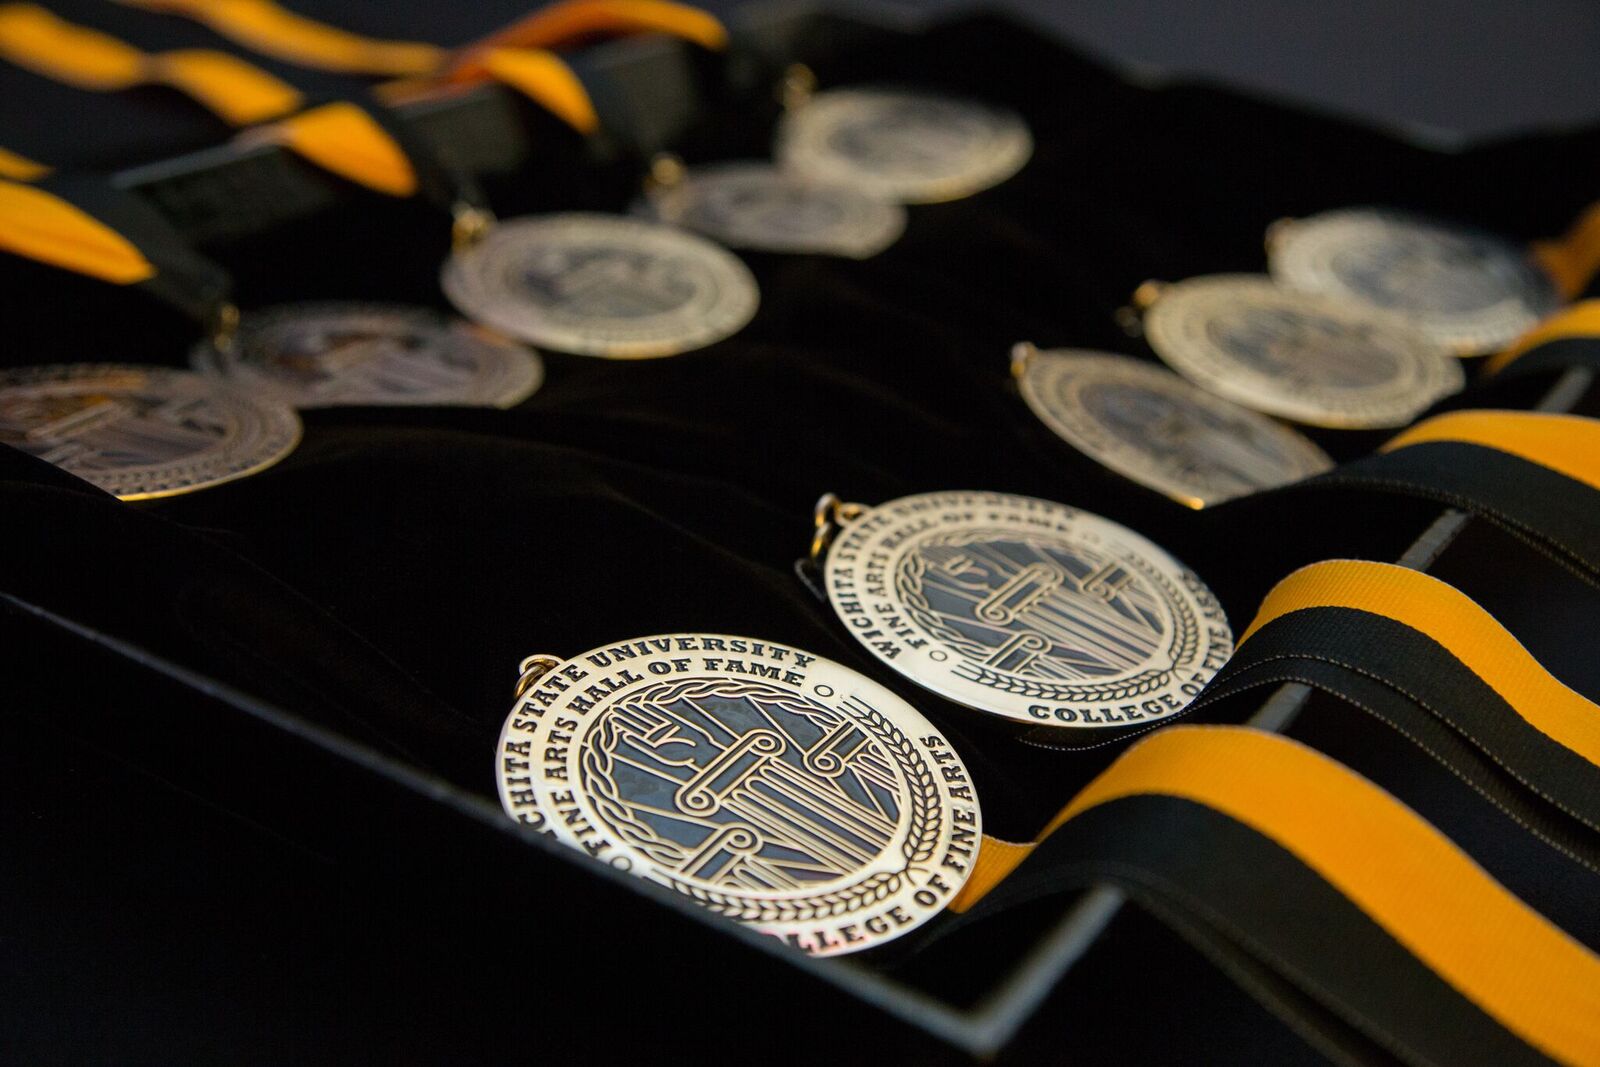 Hall of Fame medals